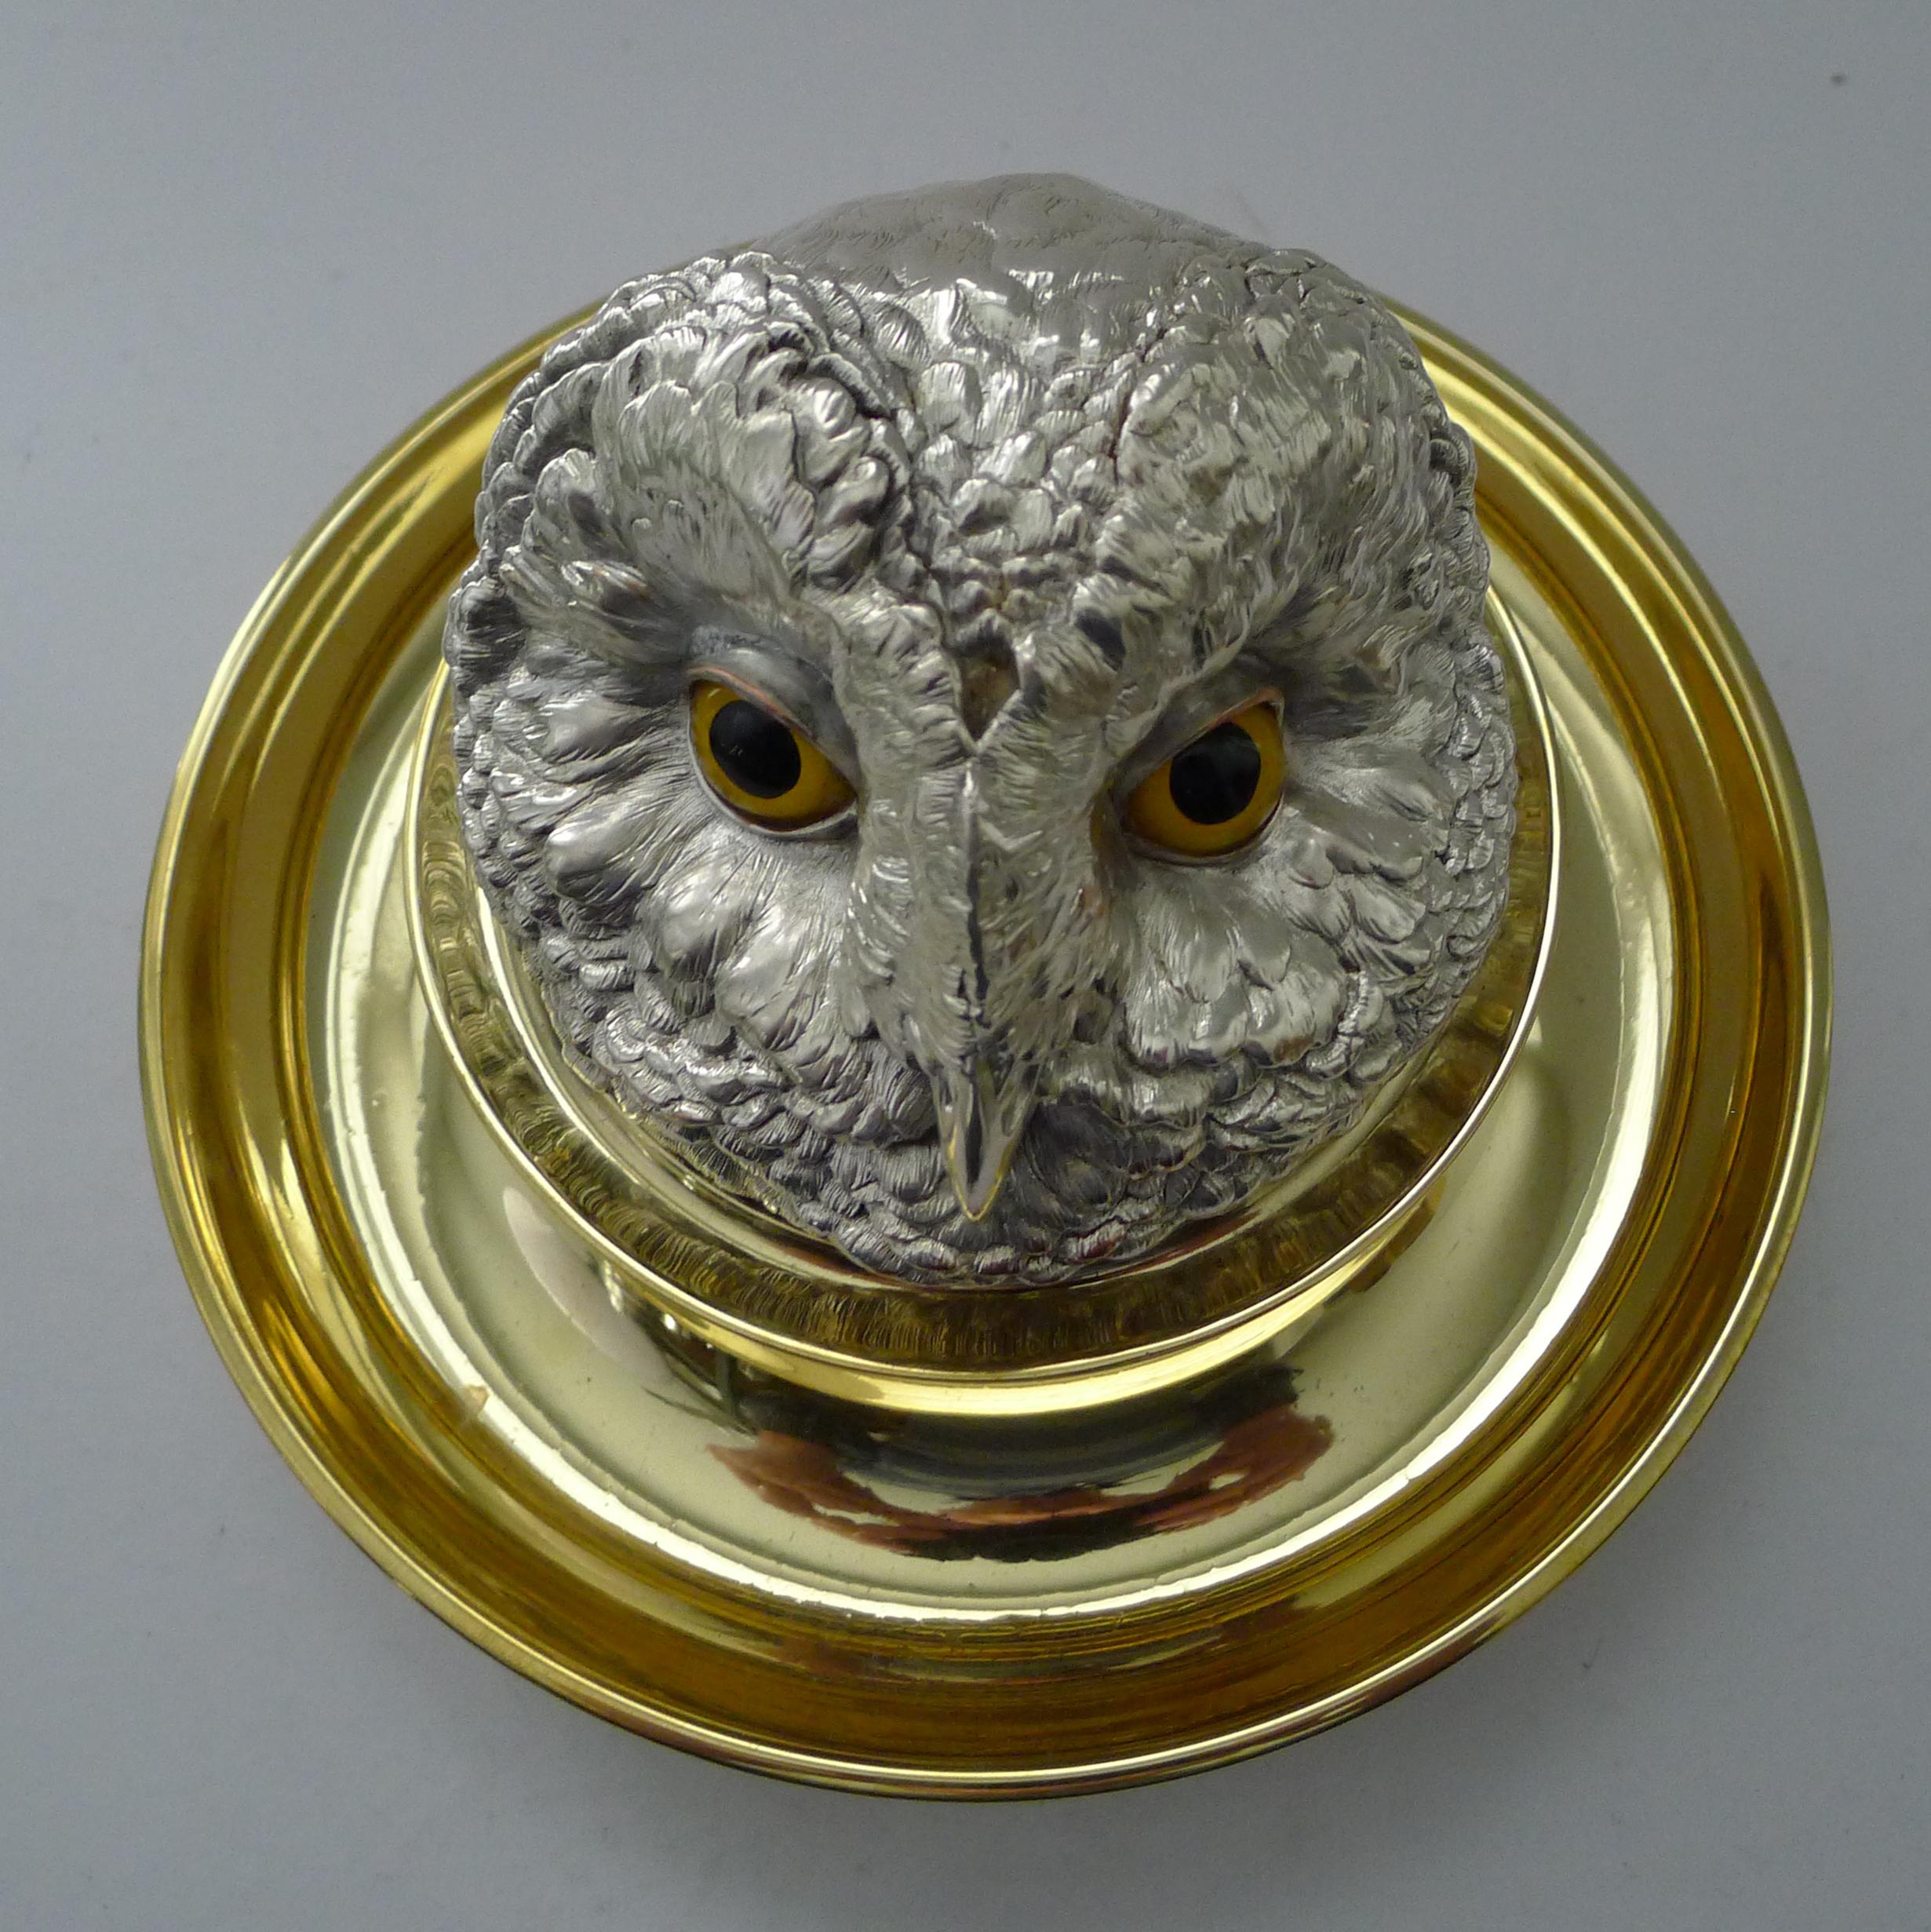 Late 19th Century Rare Mammoth English Victorian Novelty Inkwell, Owl with Glass Eyes C.1880 For Sale